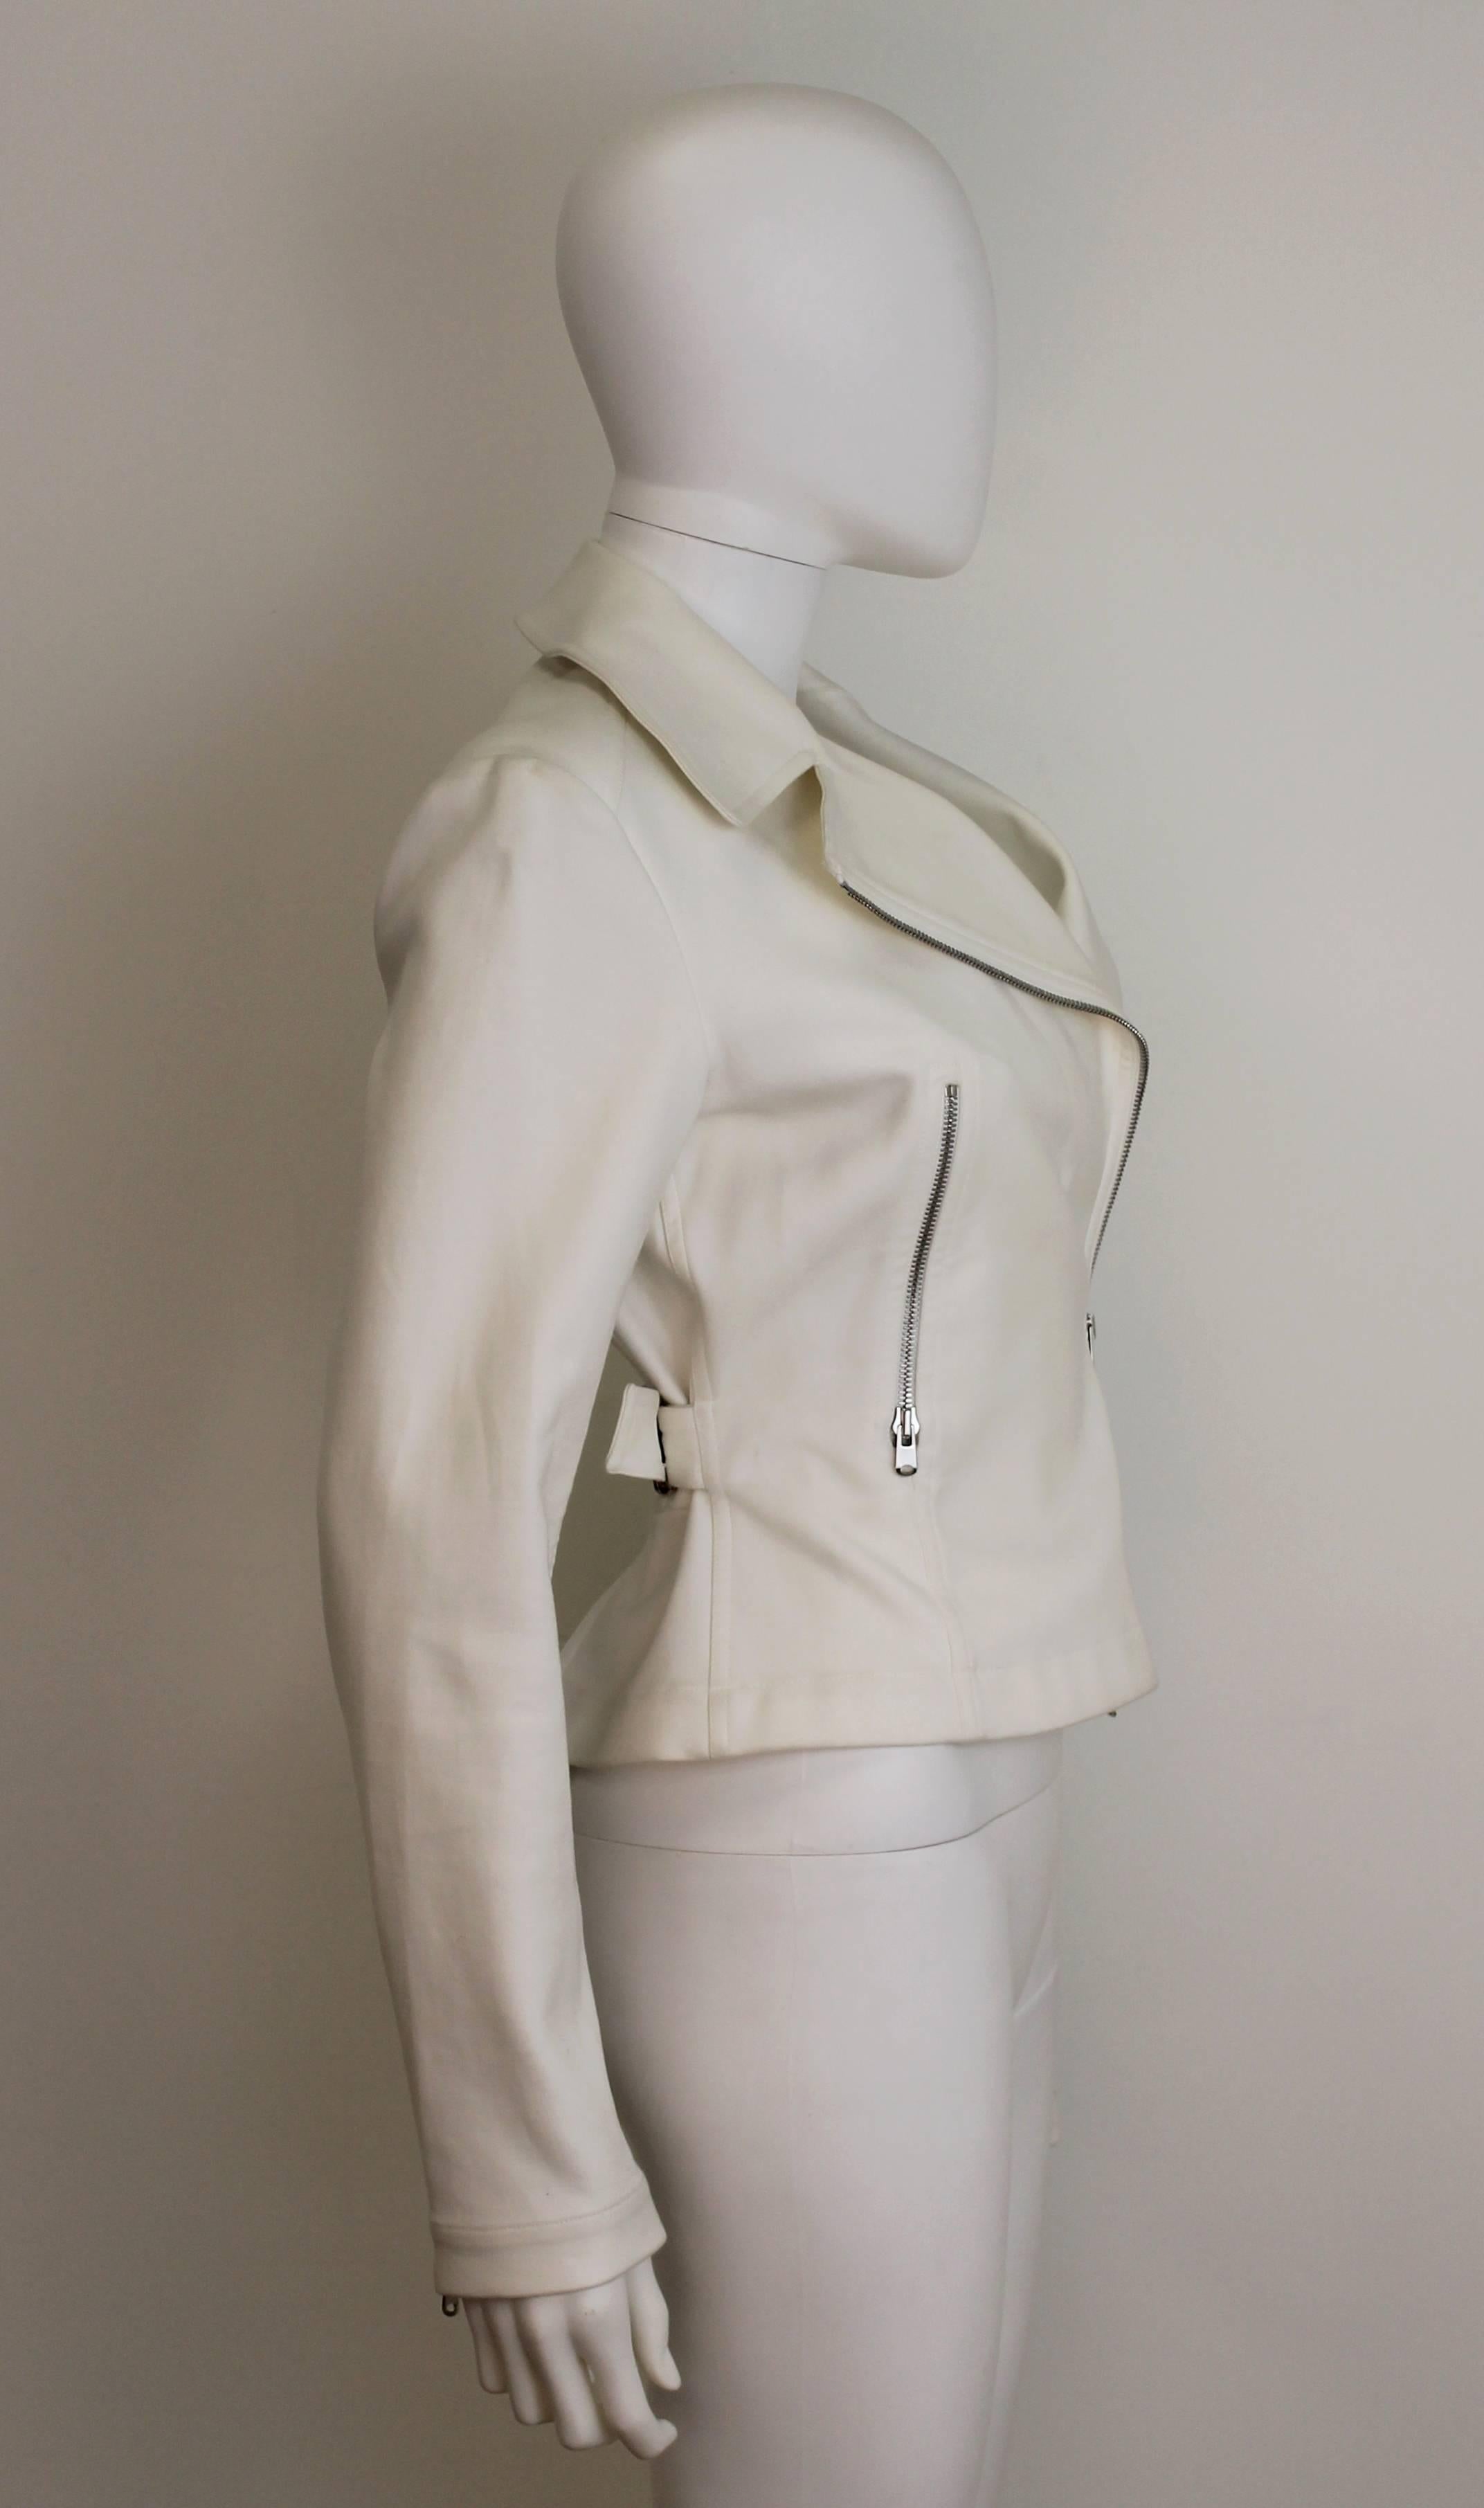 Classic white Alaia motorcycle jacket in stretchy cotton. Features silver zip closure and adjustable buckle waist.